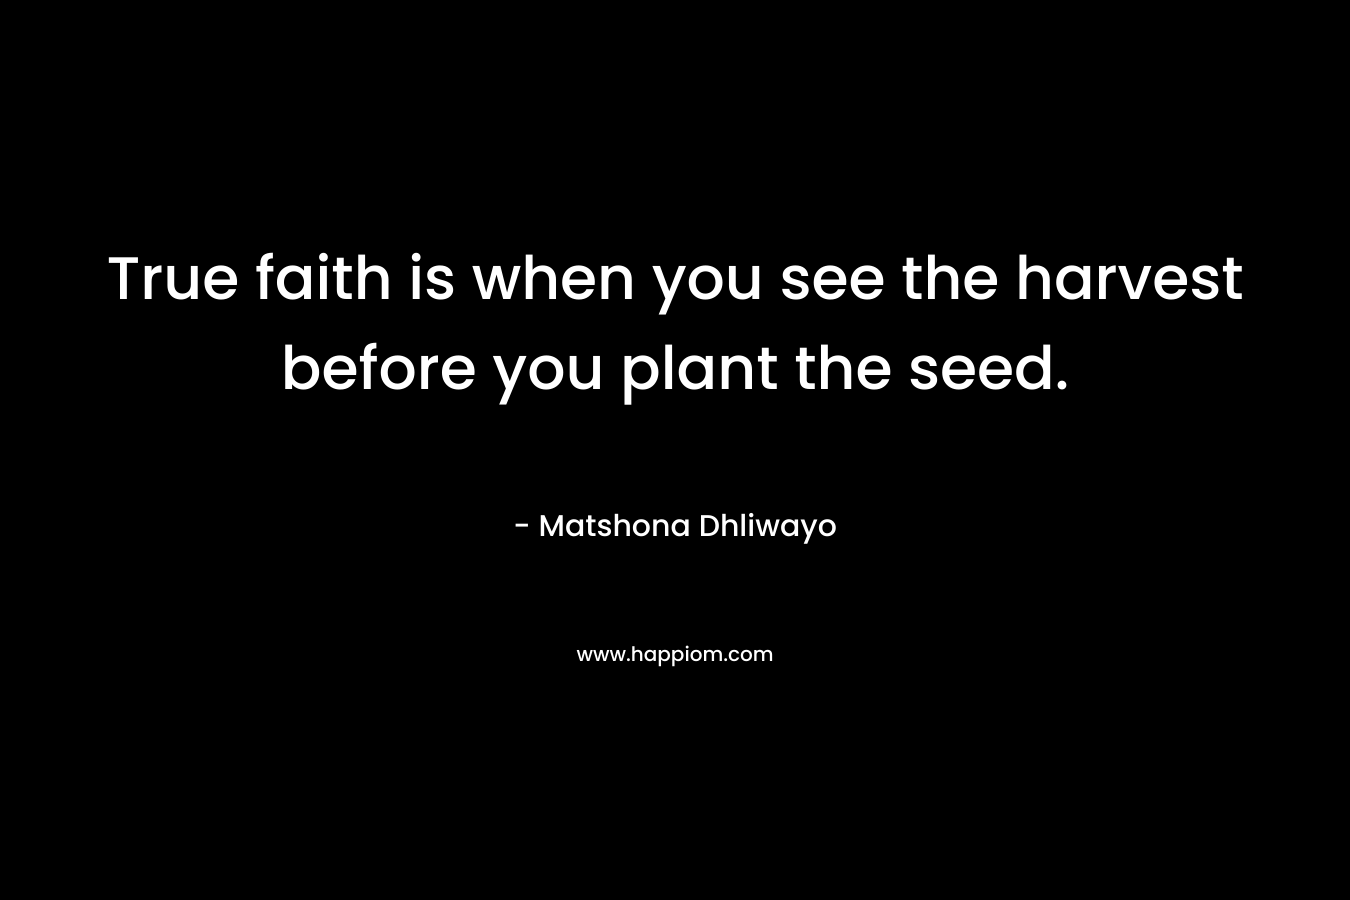 True faith is when you see the harvest before you plant the seed. – Matshona Dhliwayo